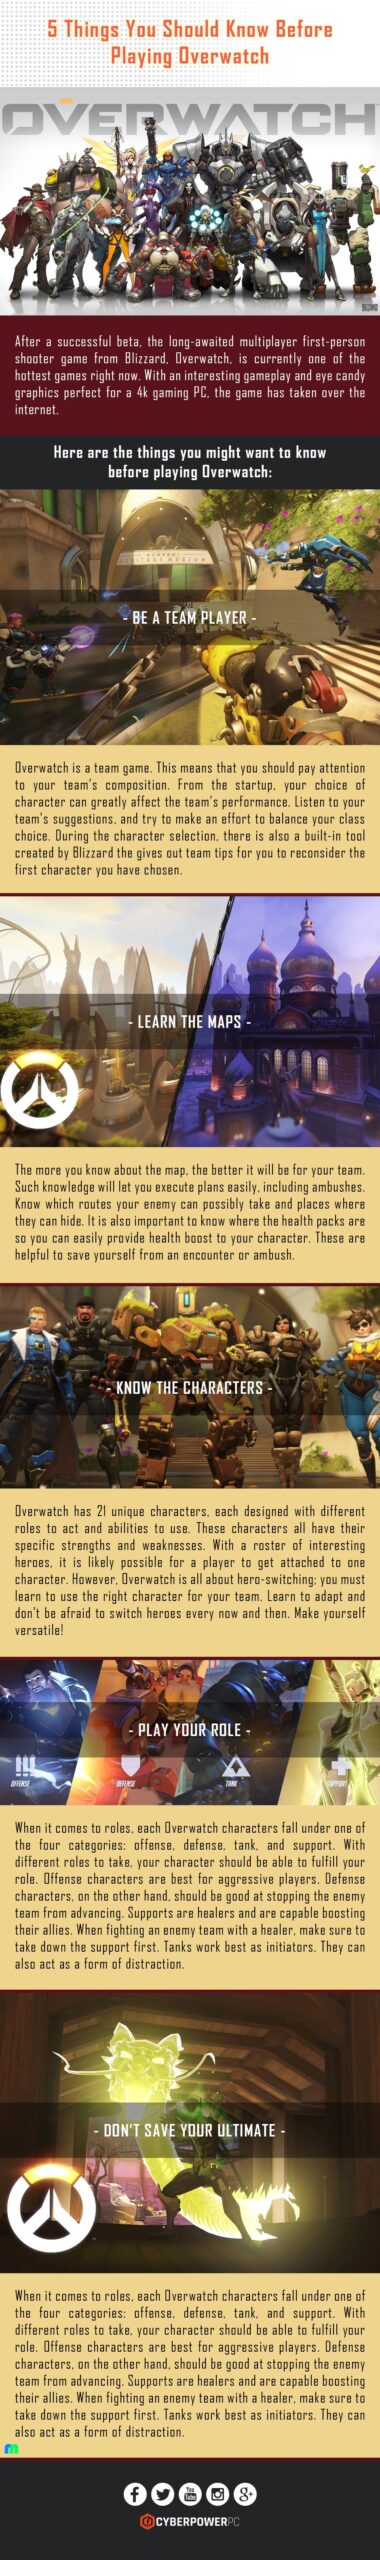 5 Things You Should Know Before Playing Overwatch